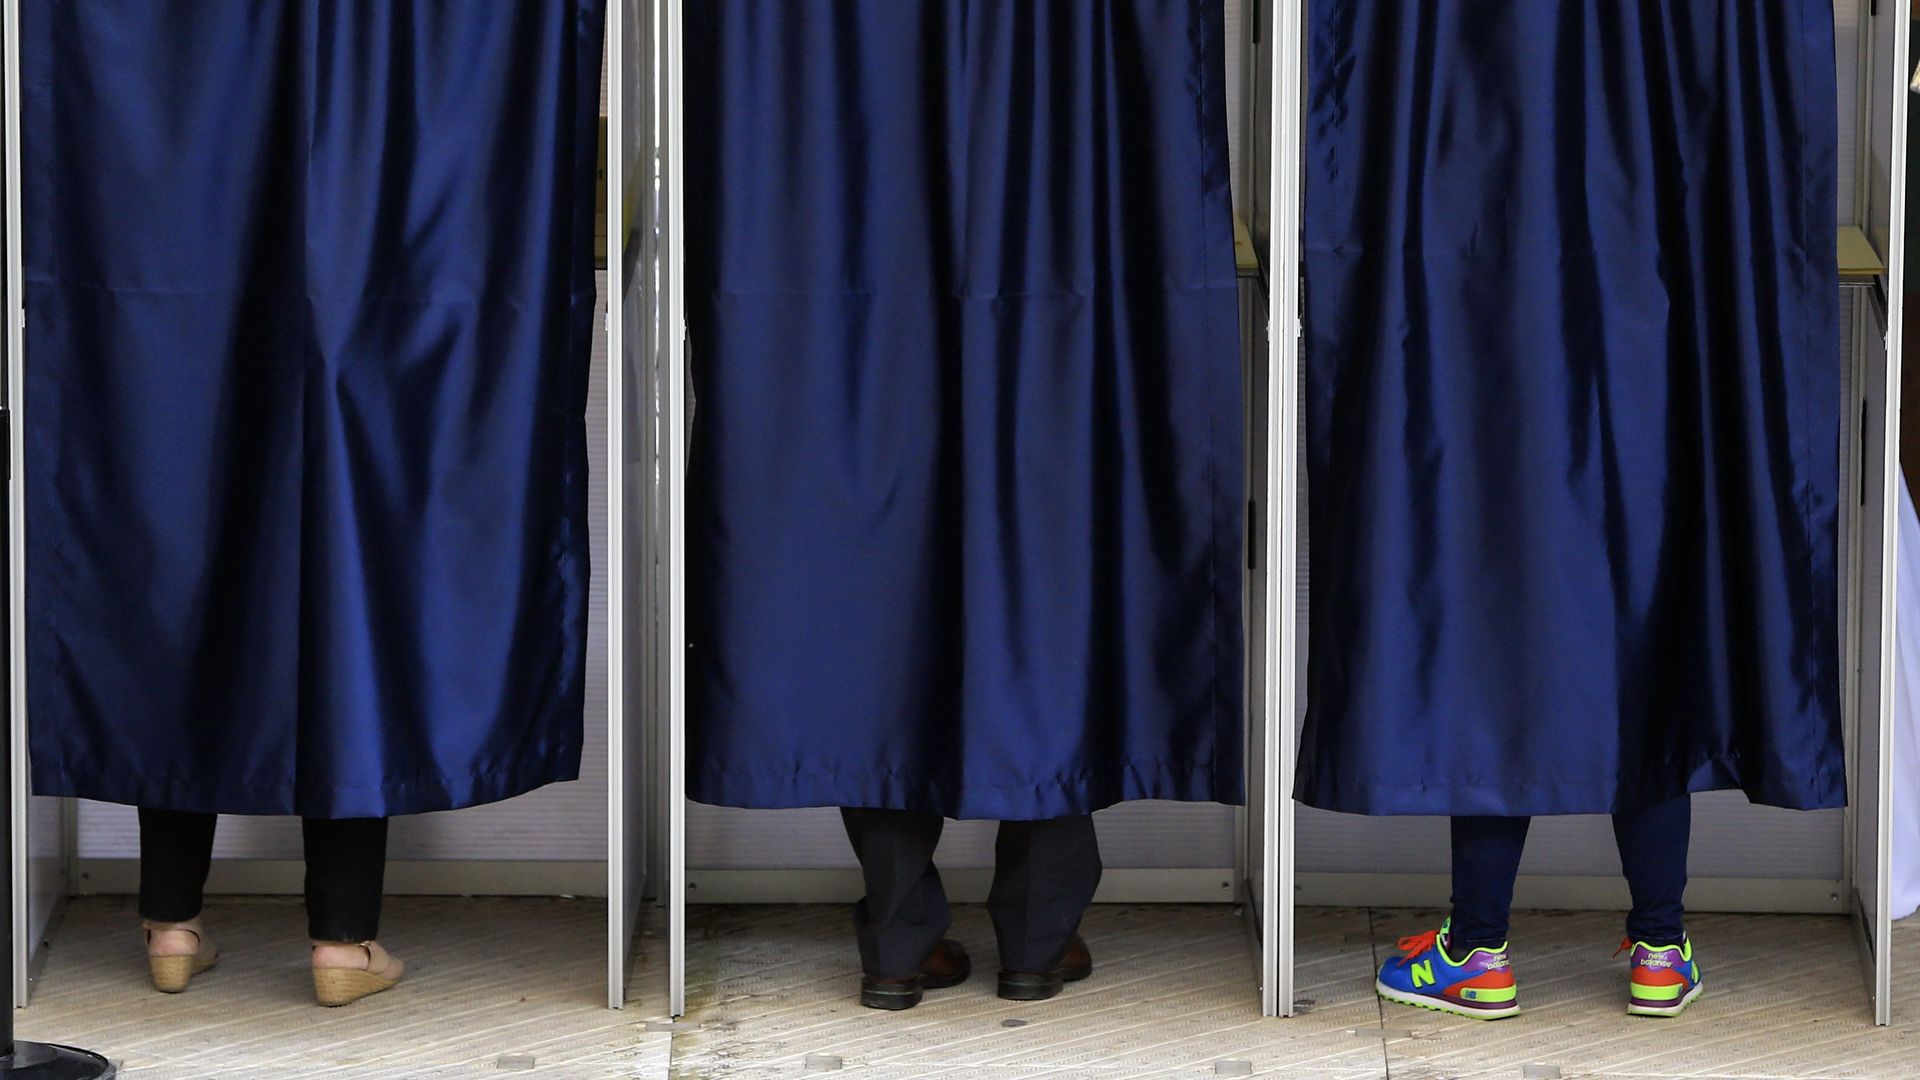 Blue curtains covering three voting booths. You can see the shoes of three different people at the bottom of each curtain